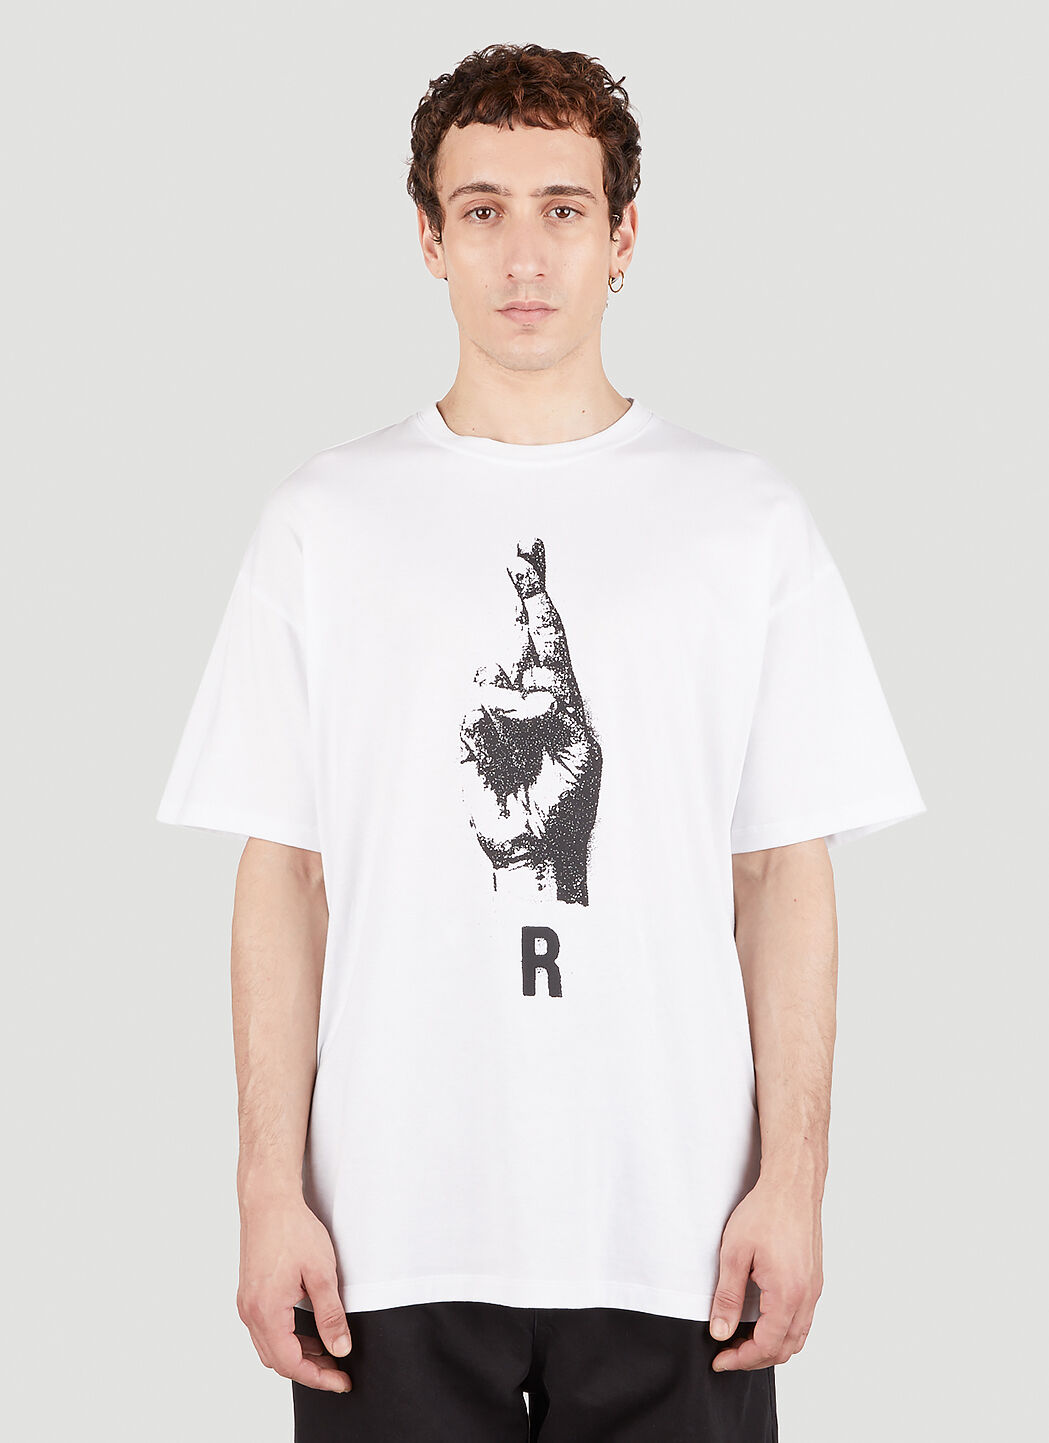 Raf Simons x Fred Perry グラフィックプリントTシャツ ブラック rsf0152002